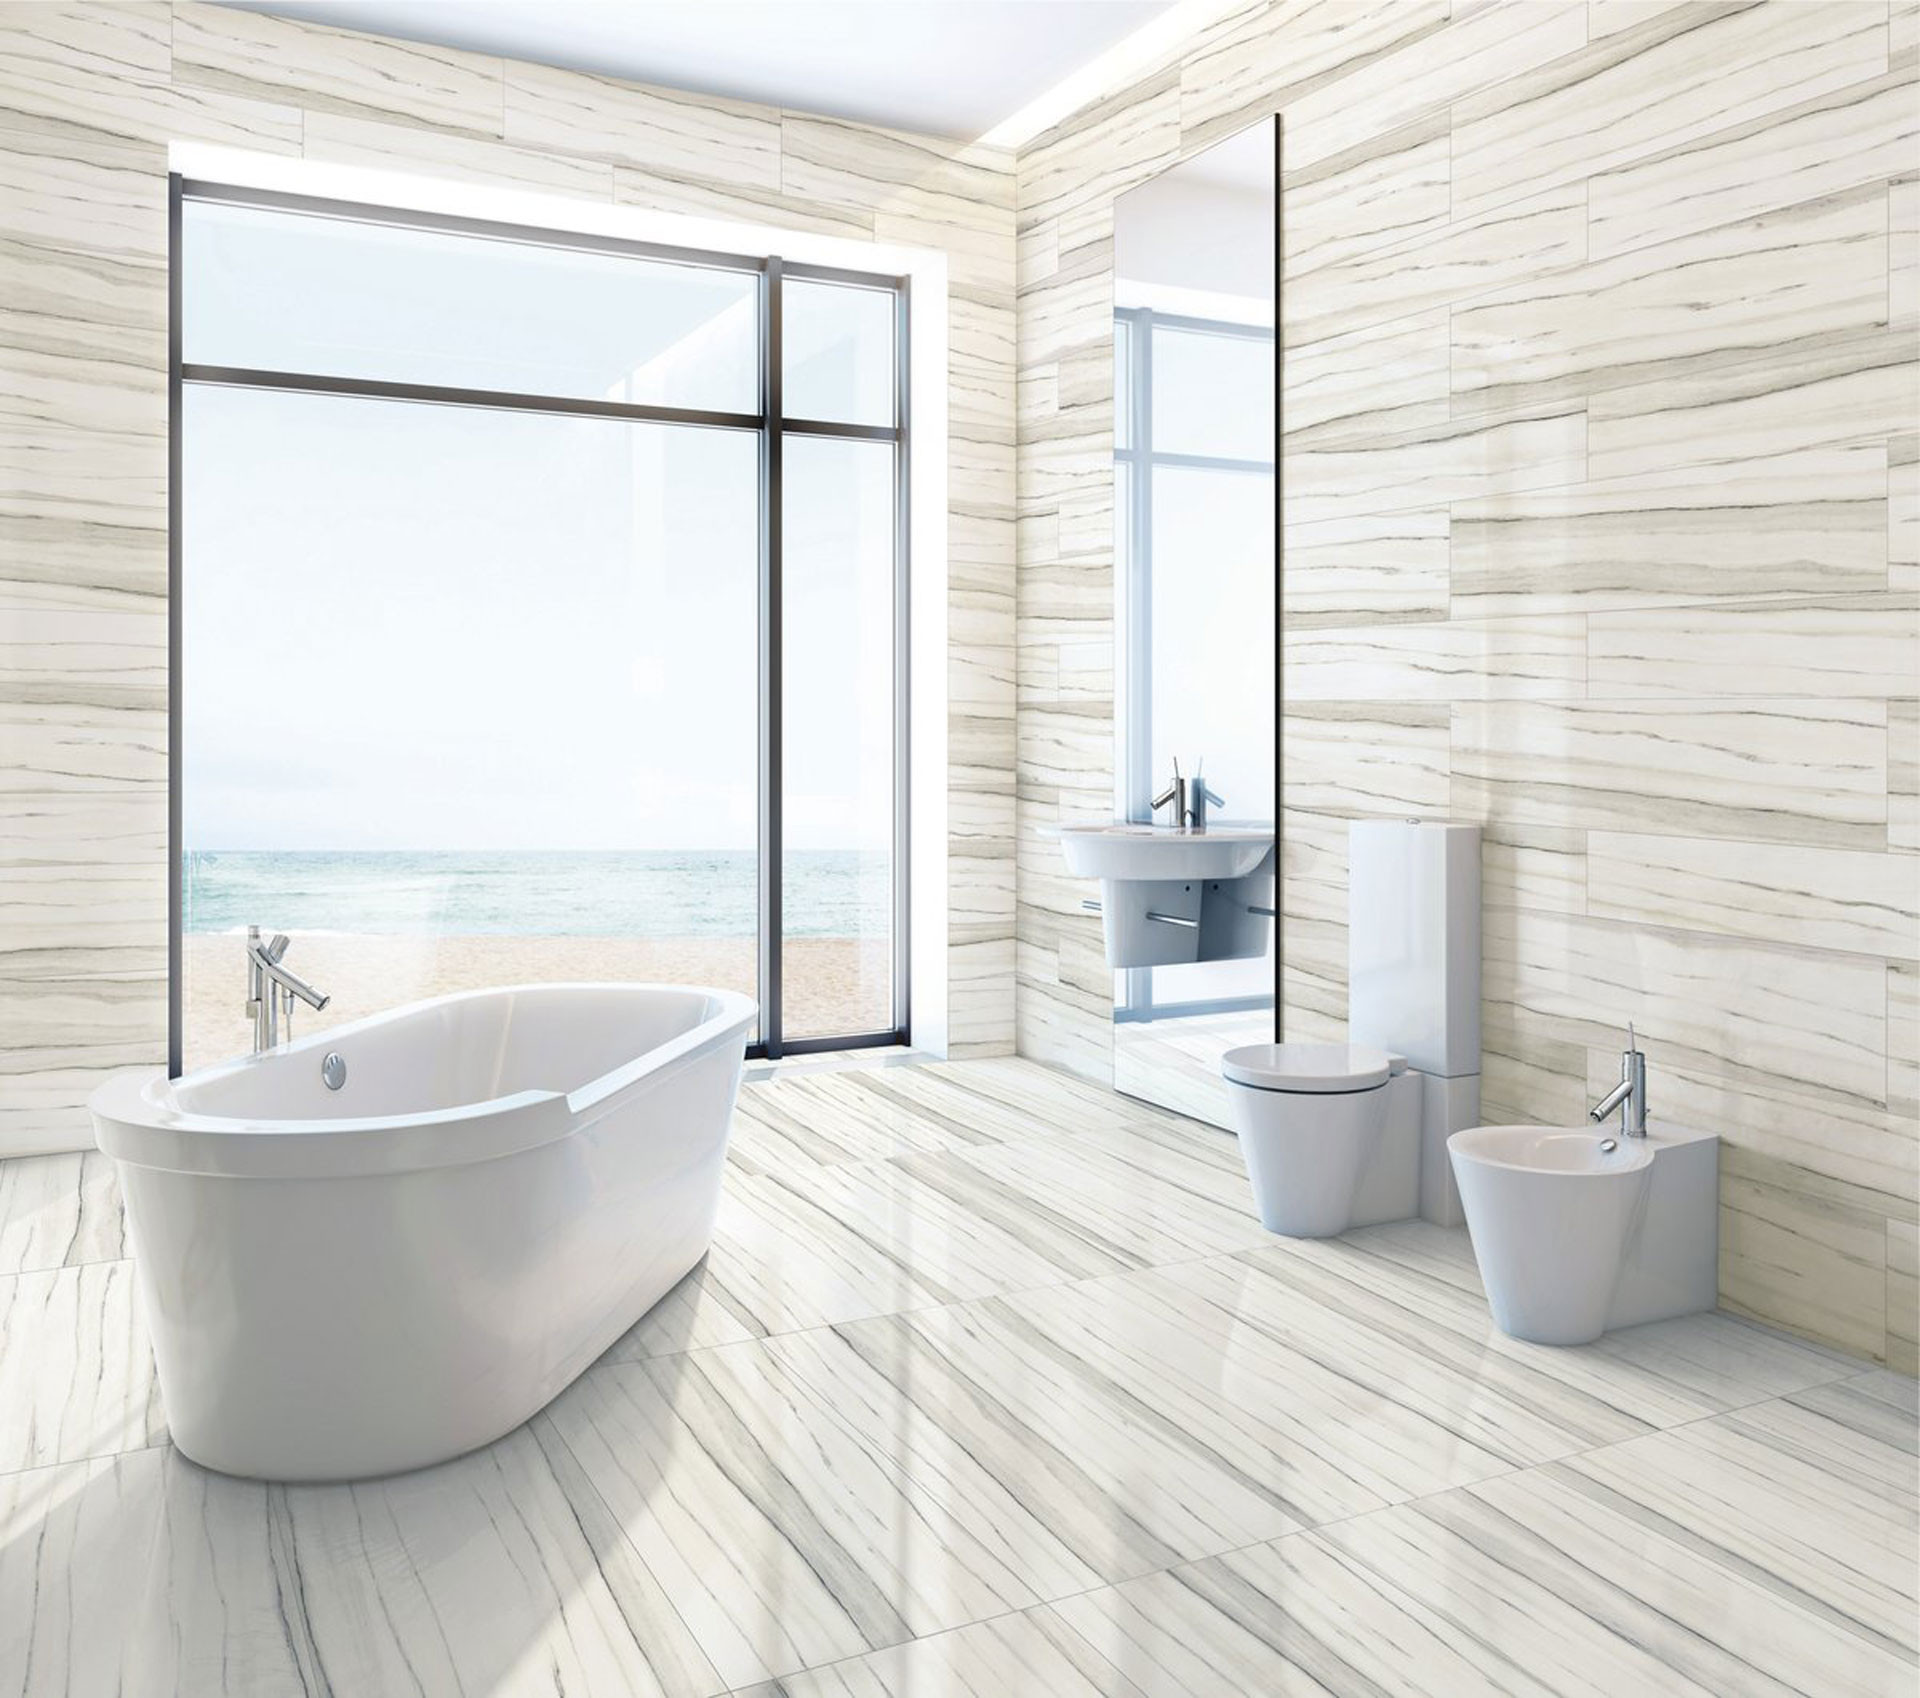 Tile Floors For Bathrooms
 The contemporary bathroom with Stonepeak’s porcelain floor